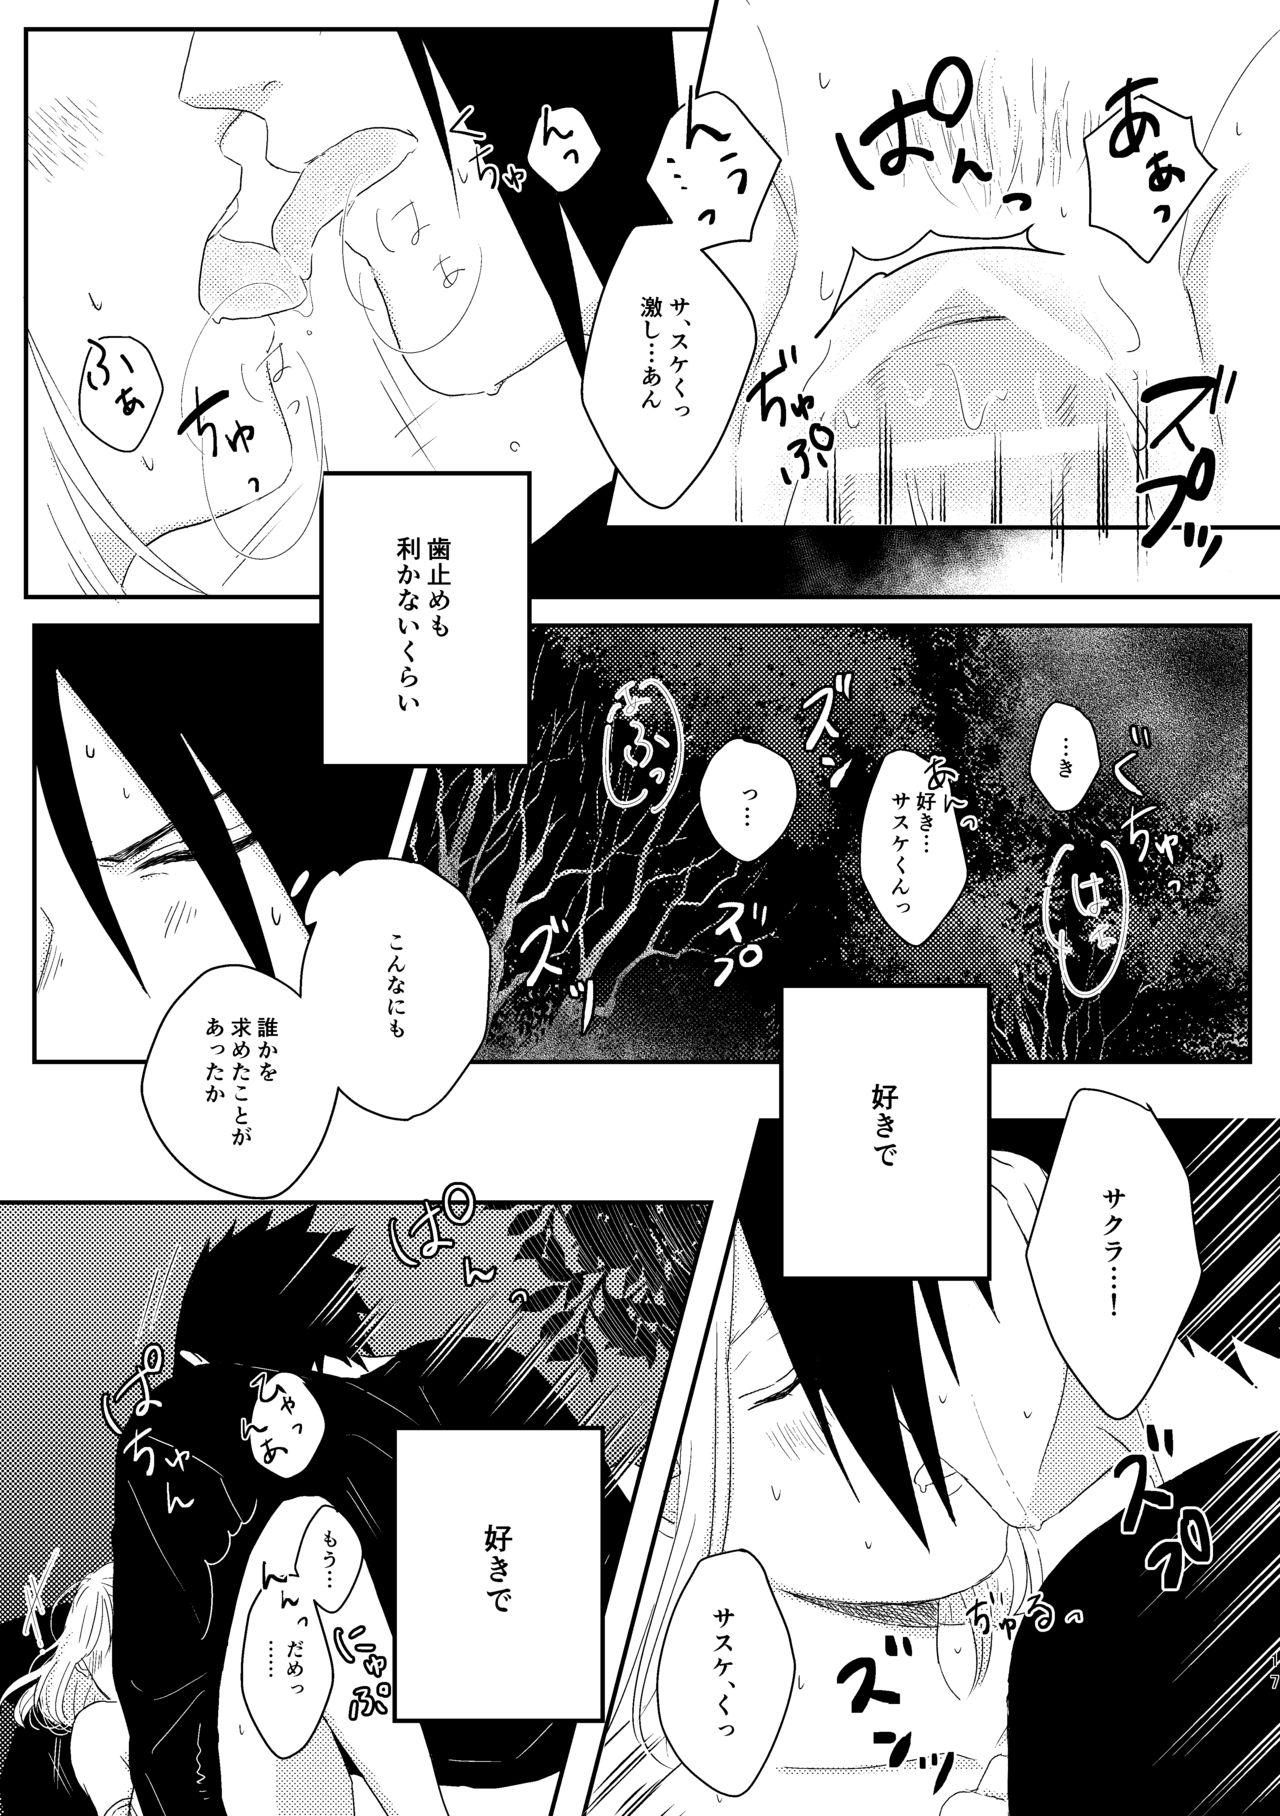 Best Blowjobs Ever sssk* - Naruto Playing - Page 16